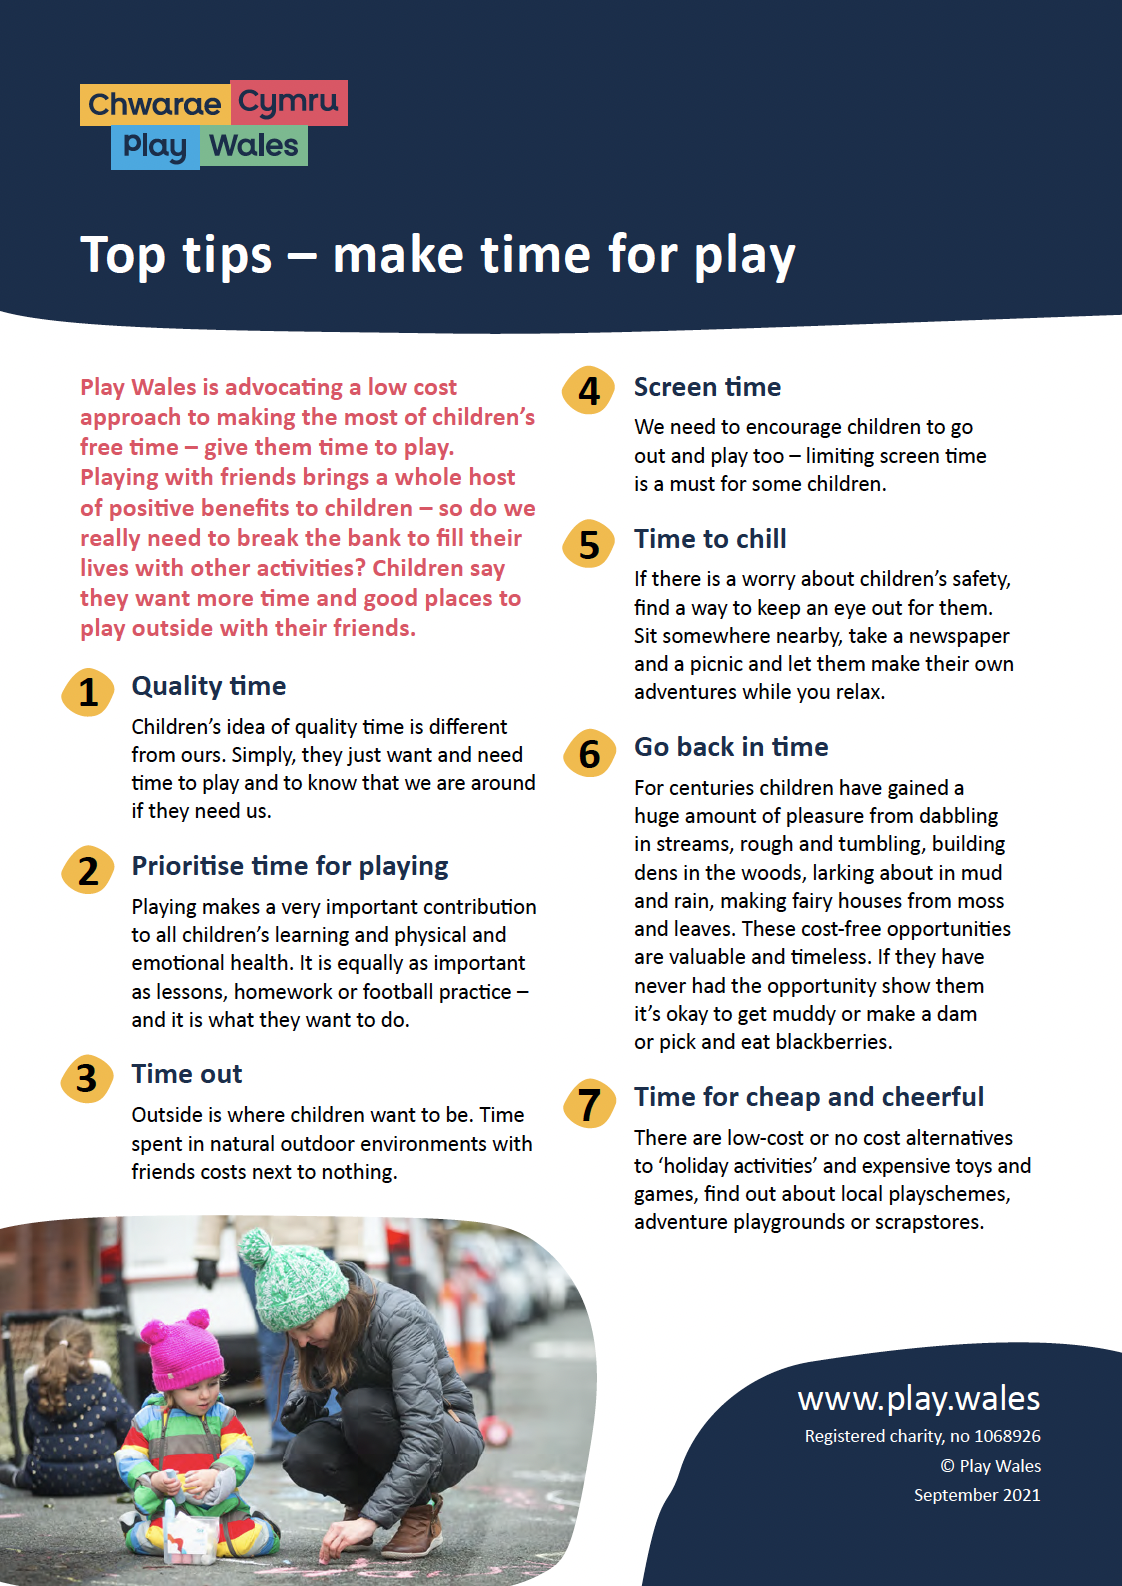 Top tips – make time for play